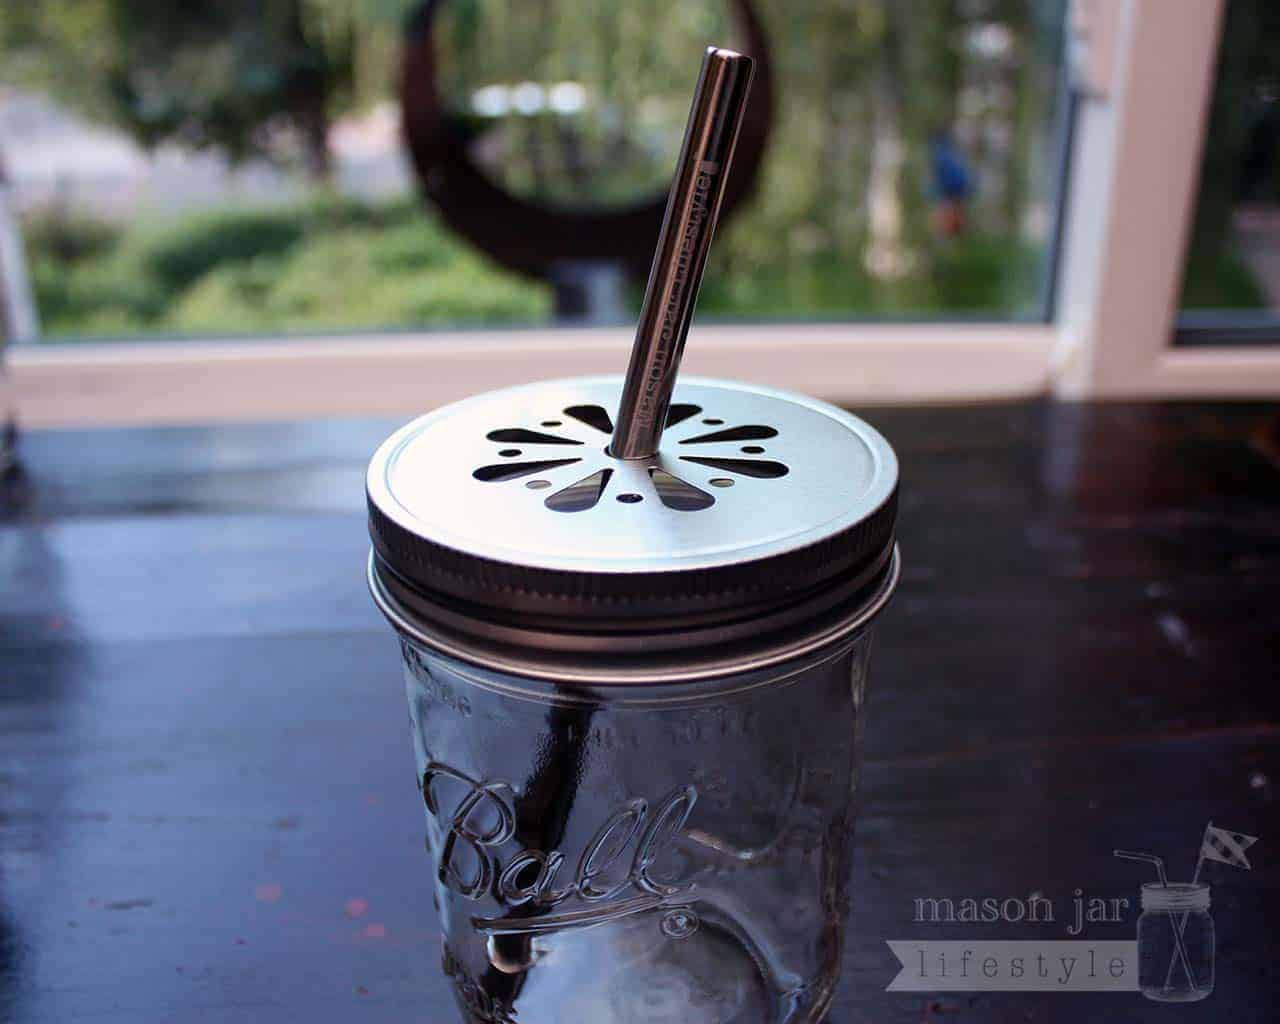 Safer rounded end stainless steel straw in wide mouth daisy lid on Ball pint jar